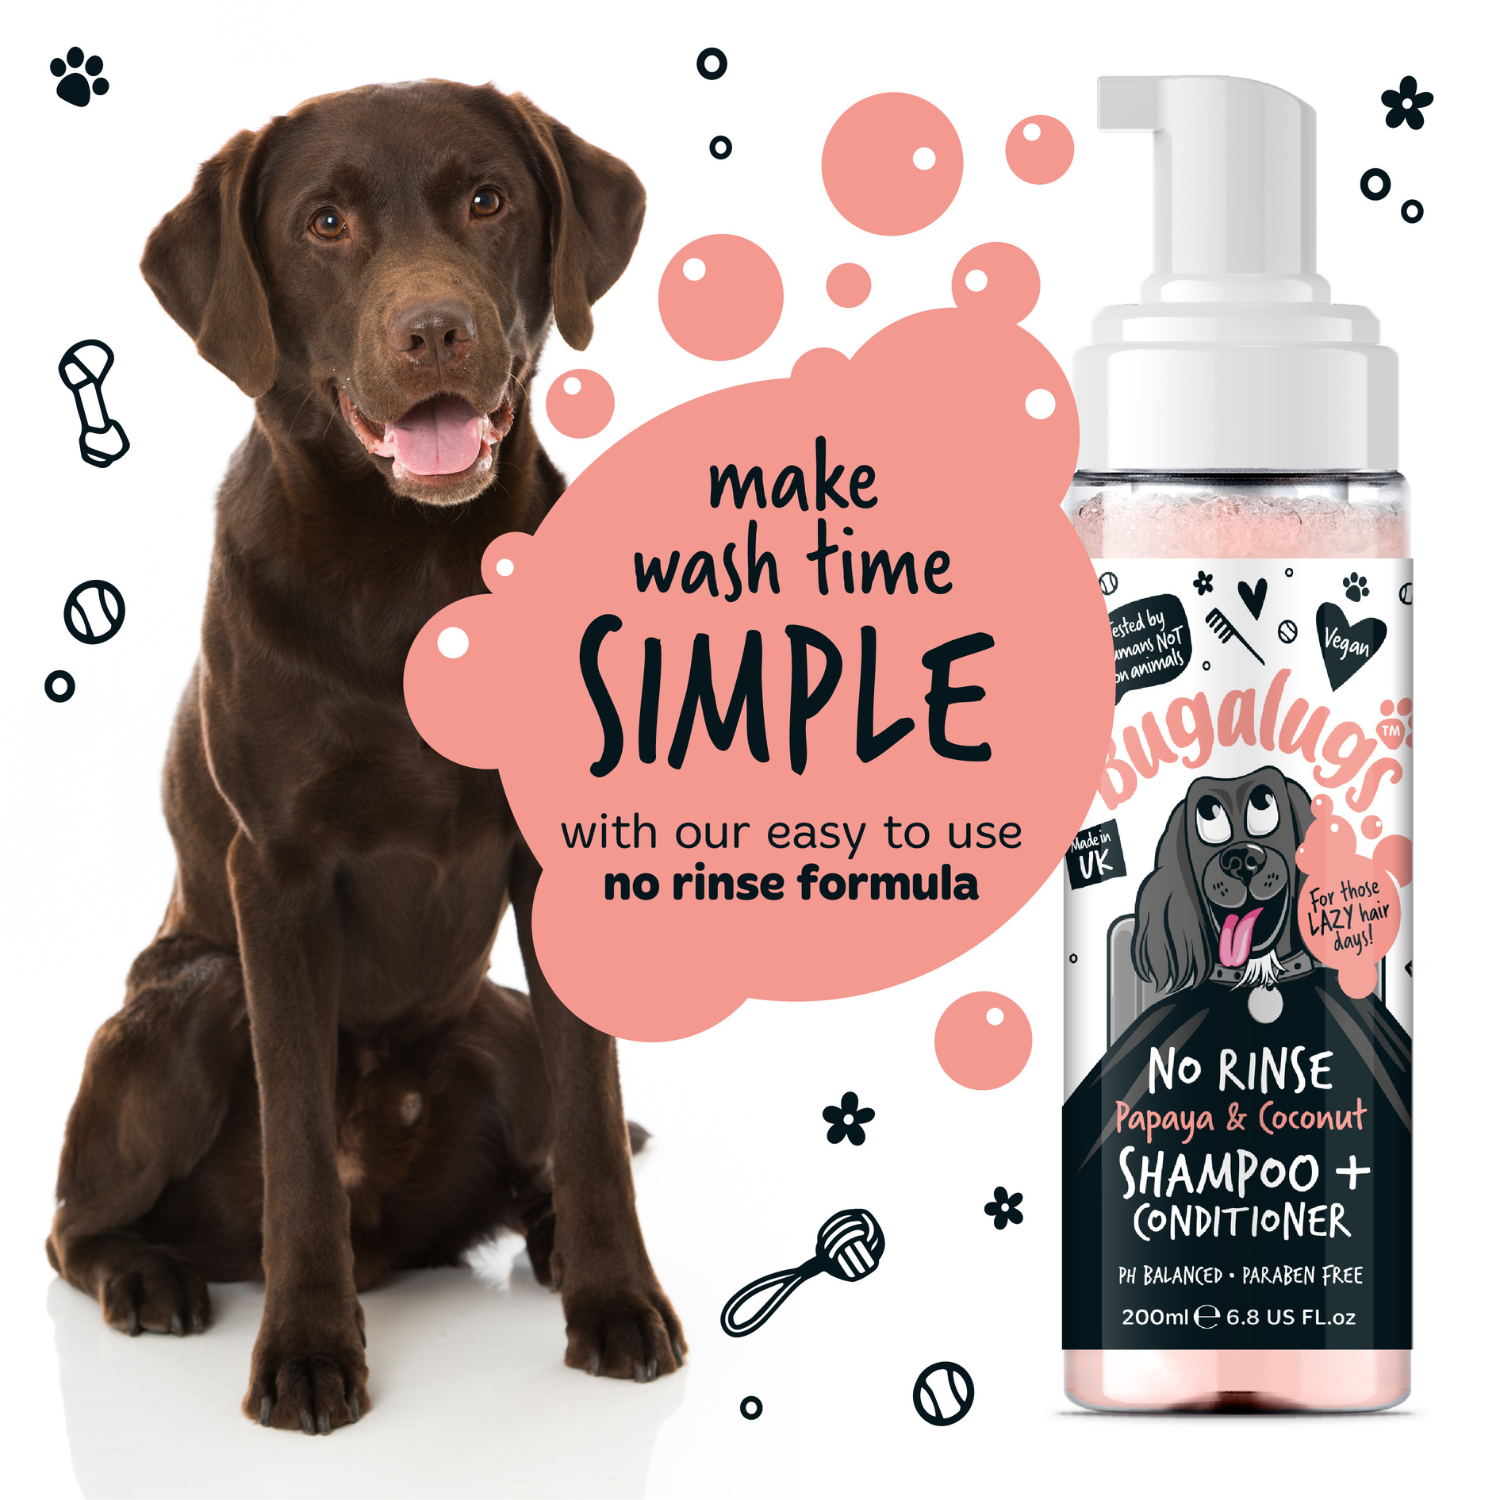 Bugalugs No Rinse Papaya and Coconut Shampoo and Conditioner for Dogs - Make wash time simple with our easy-to-use no-rinse formula